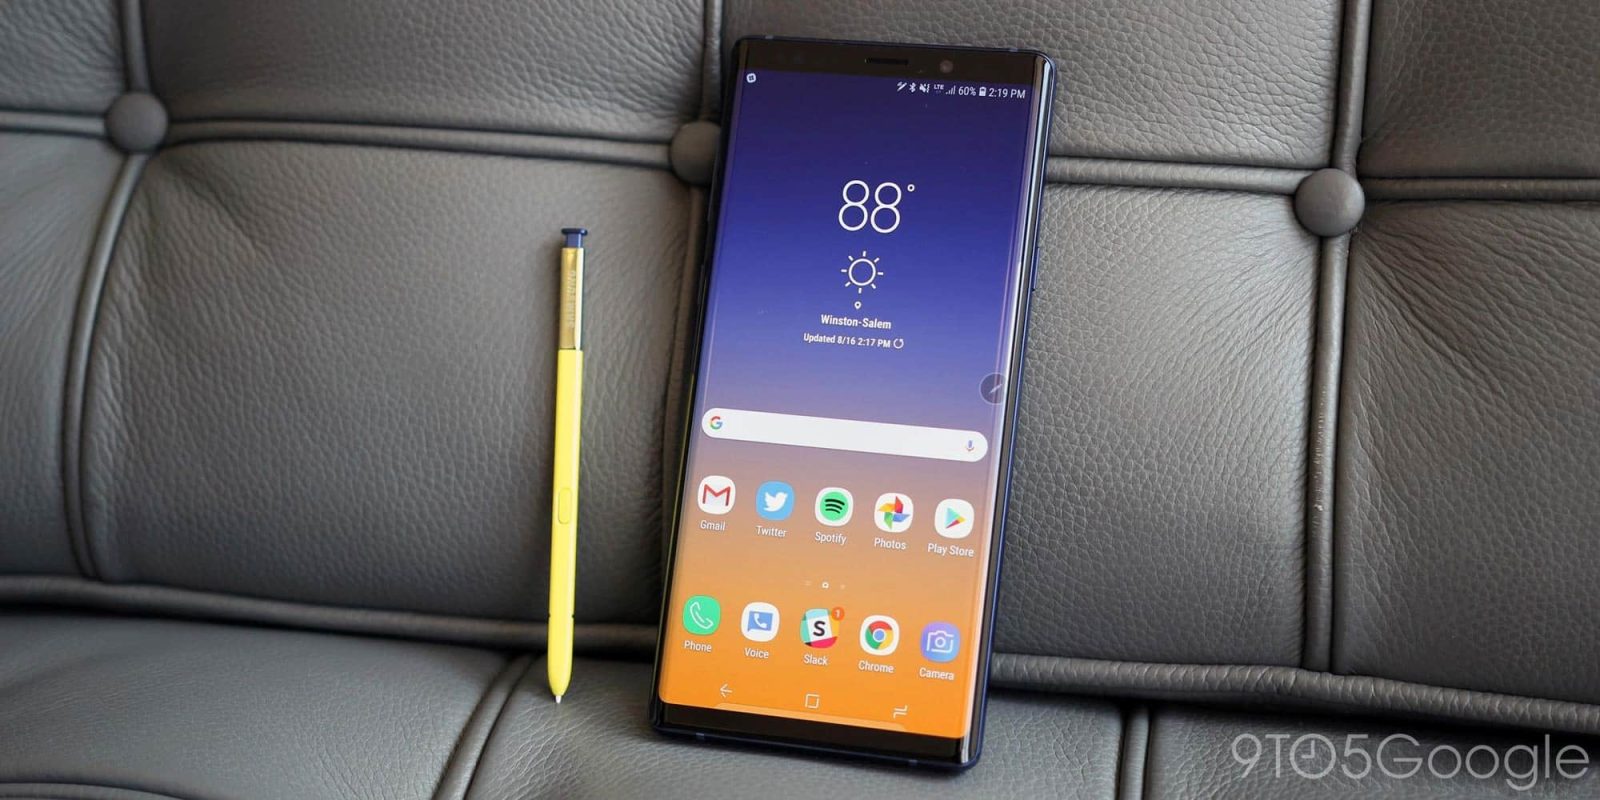 Galaxy Note 9 updates come to an end 9to5Google